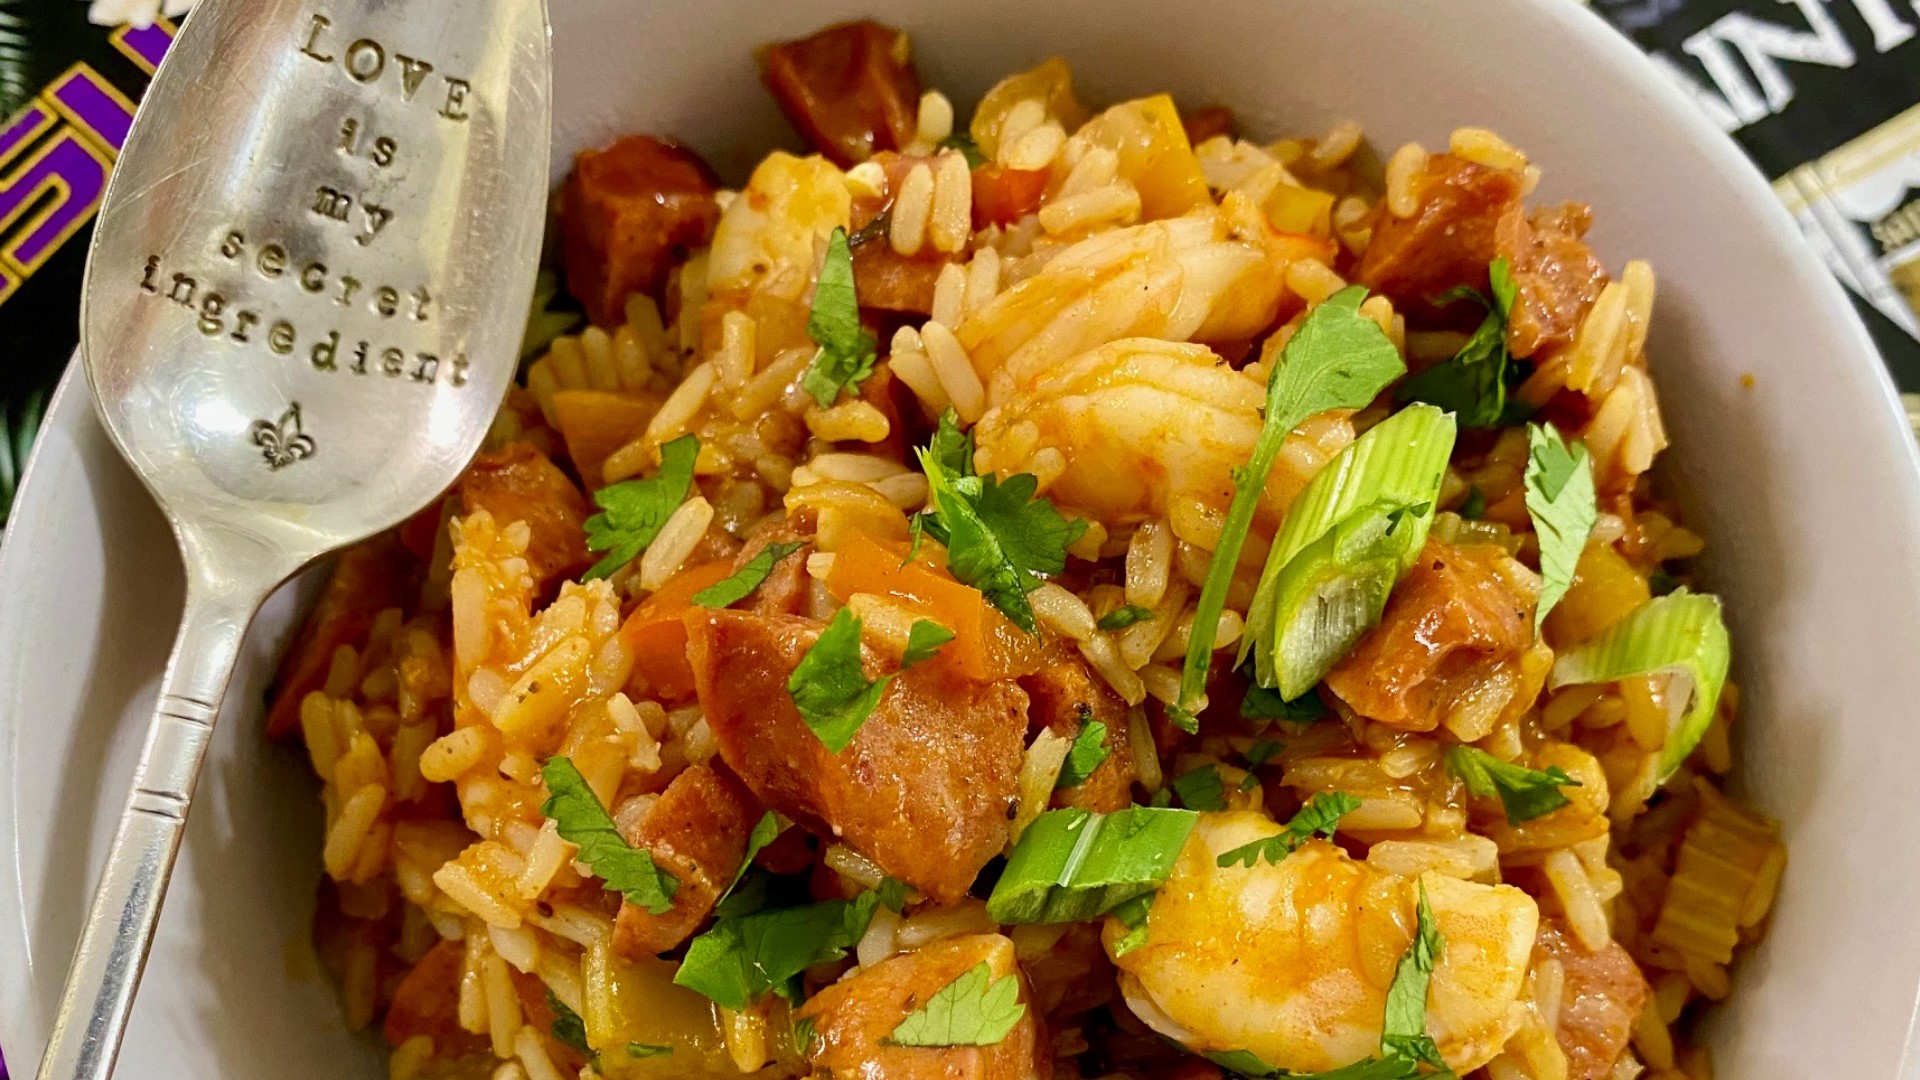 This is Red Jambalaya made with Bloody Mary Mix (What in the world! can you believe it?)